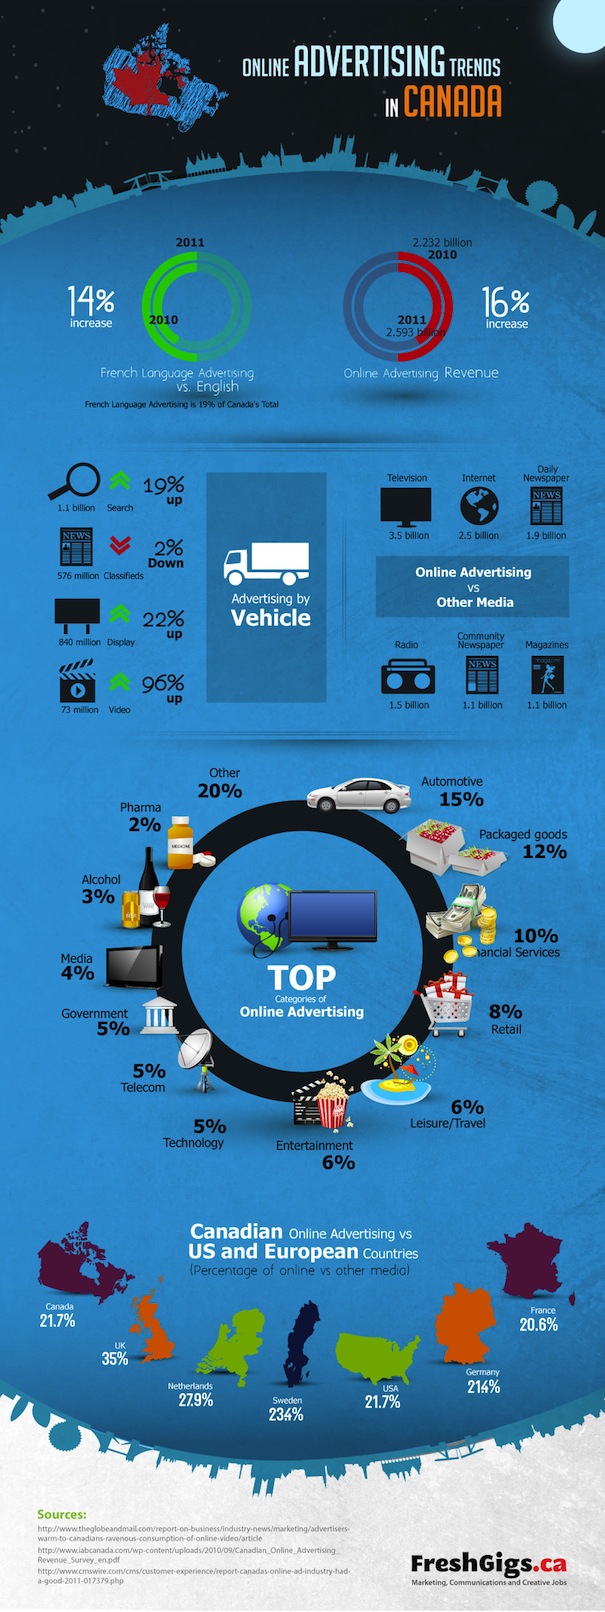 Online Advertising Trends in Canada: INFOGRAPHIC